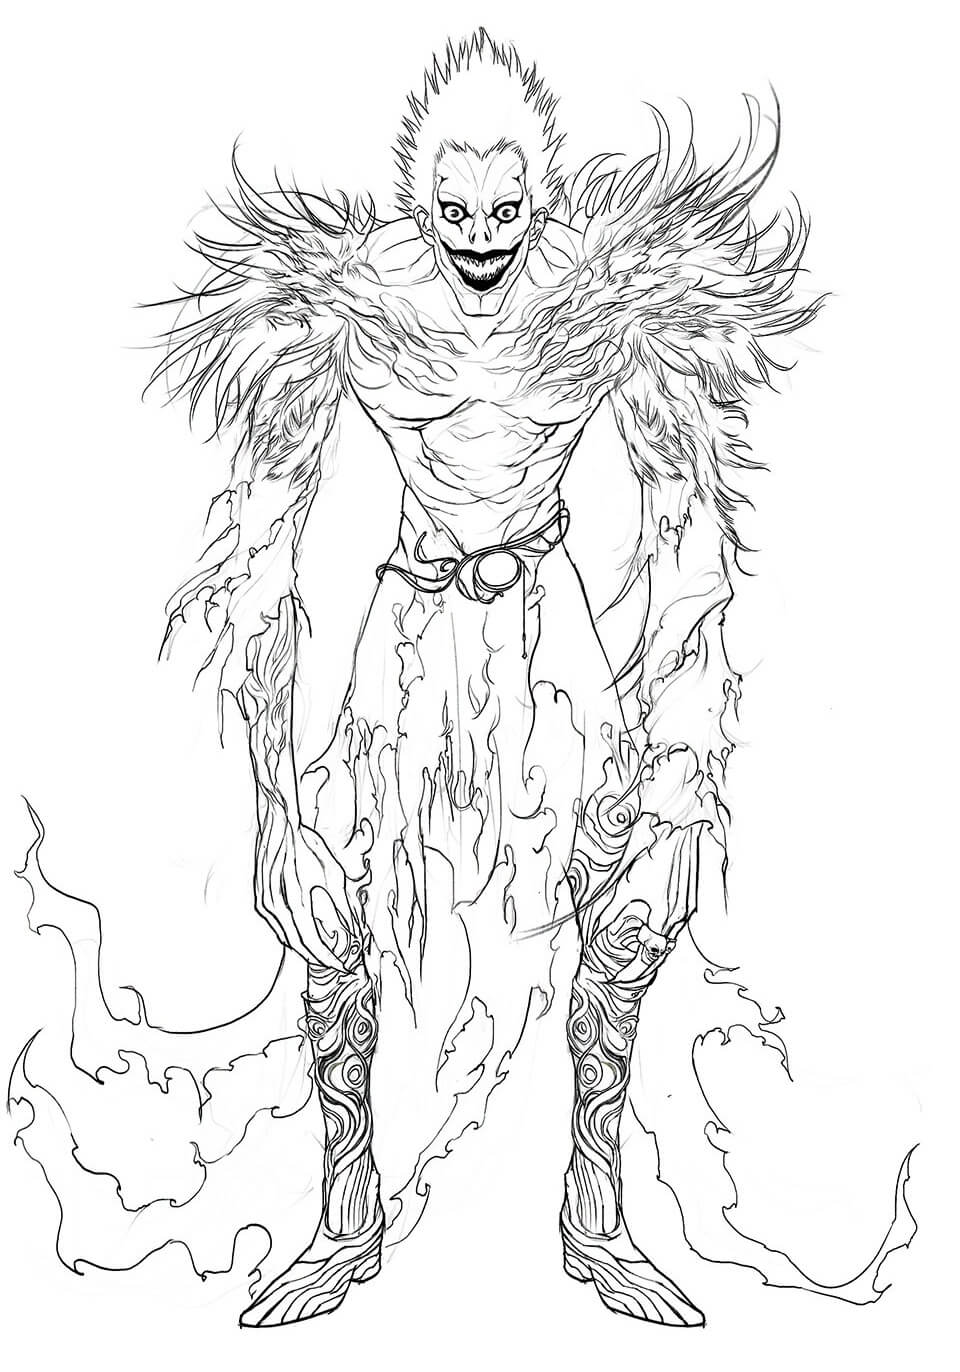 Ryuk from Death Note 20 Coloring Page   Free Printable Coloring ...